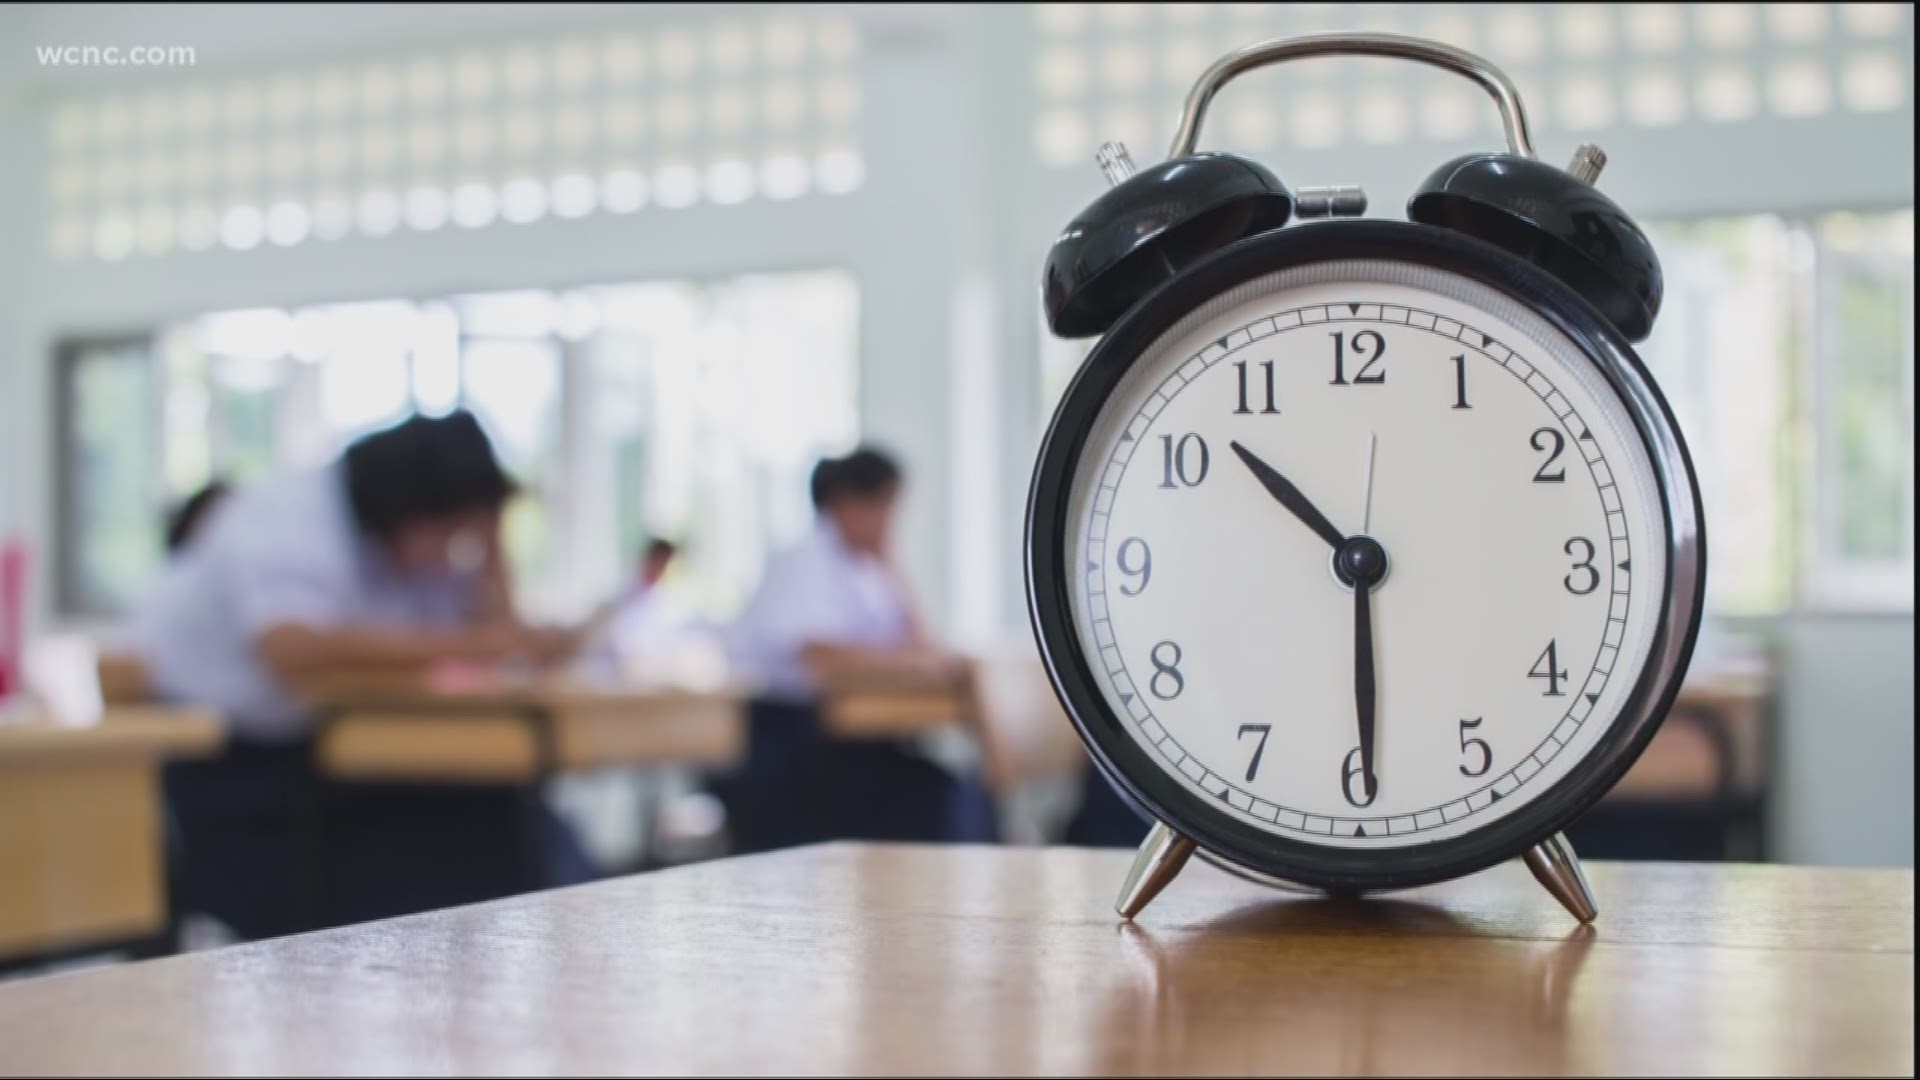 Should schools still teach kids how to tell time?